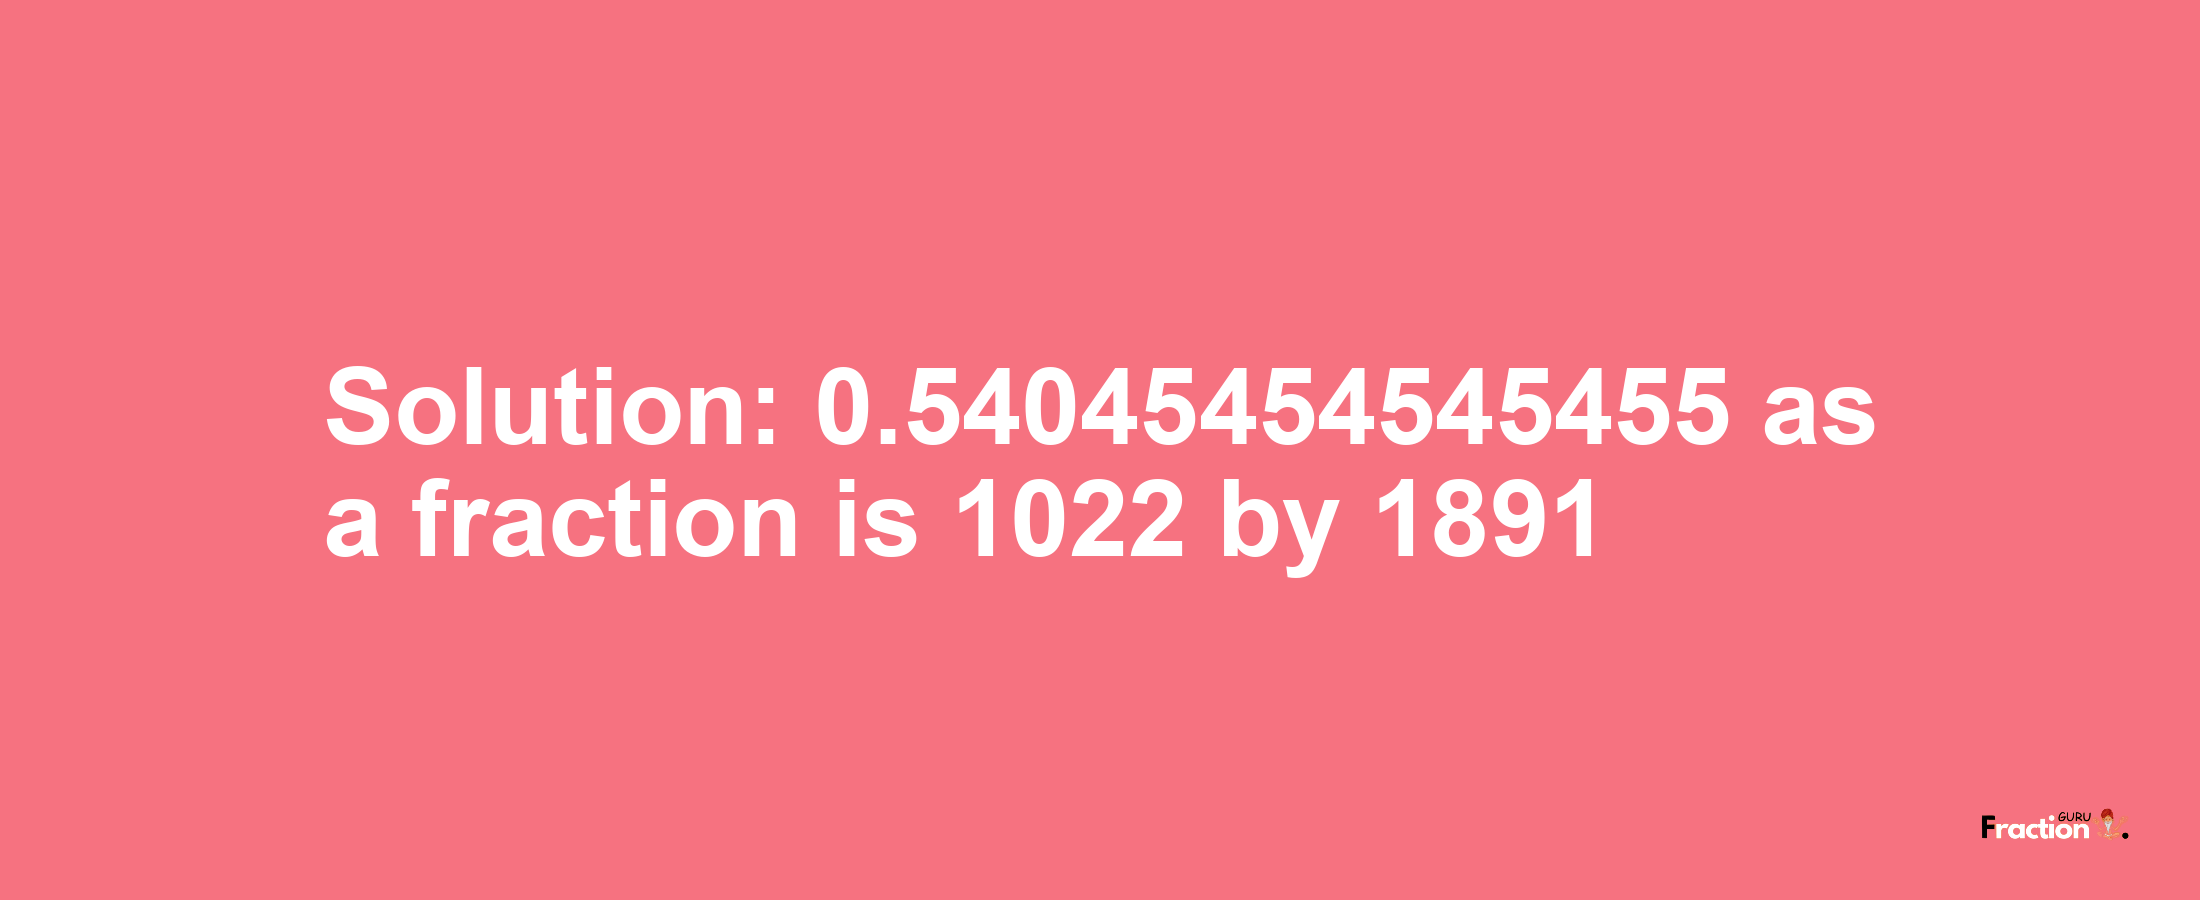 Solution:0.54045454545455 as a fraction is 1022/1891